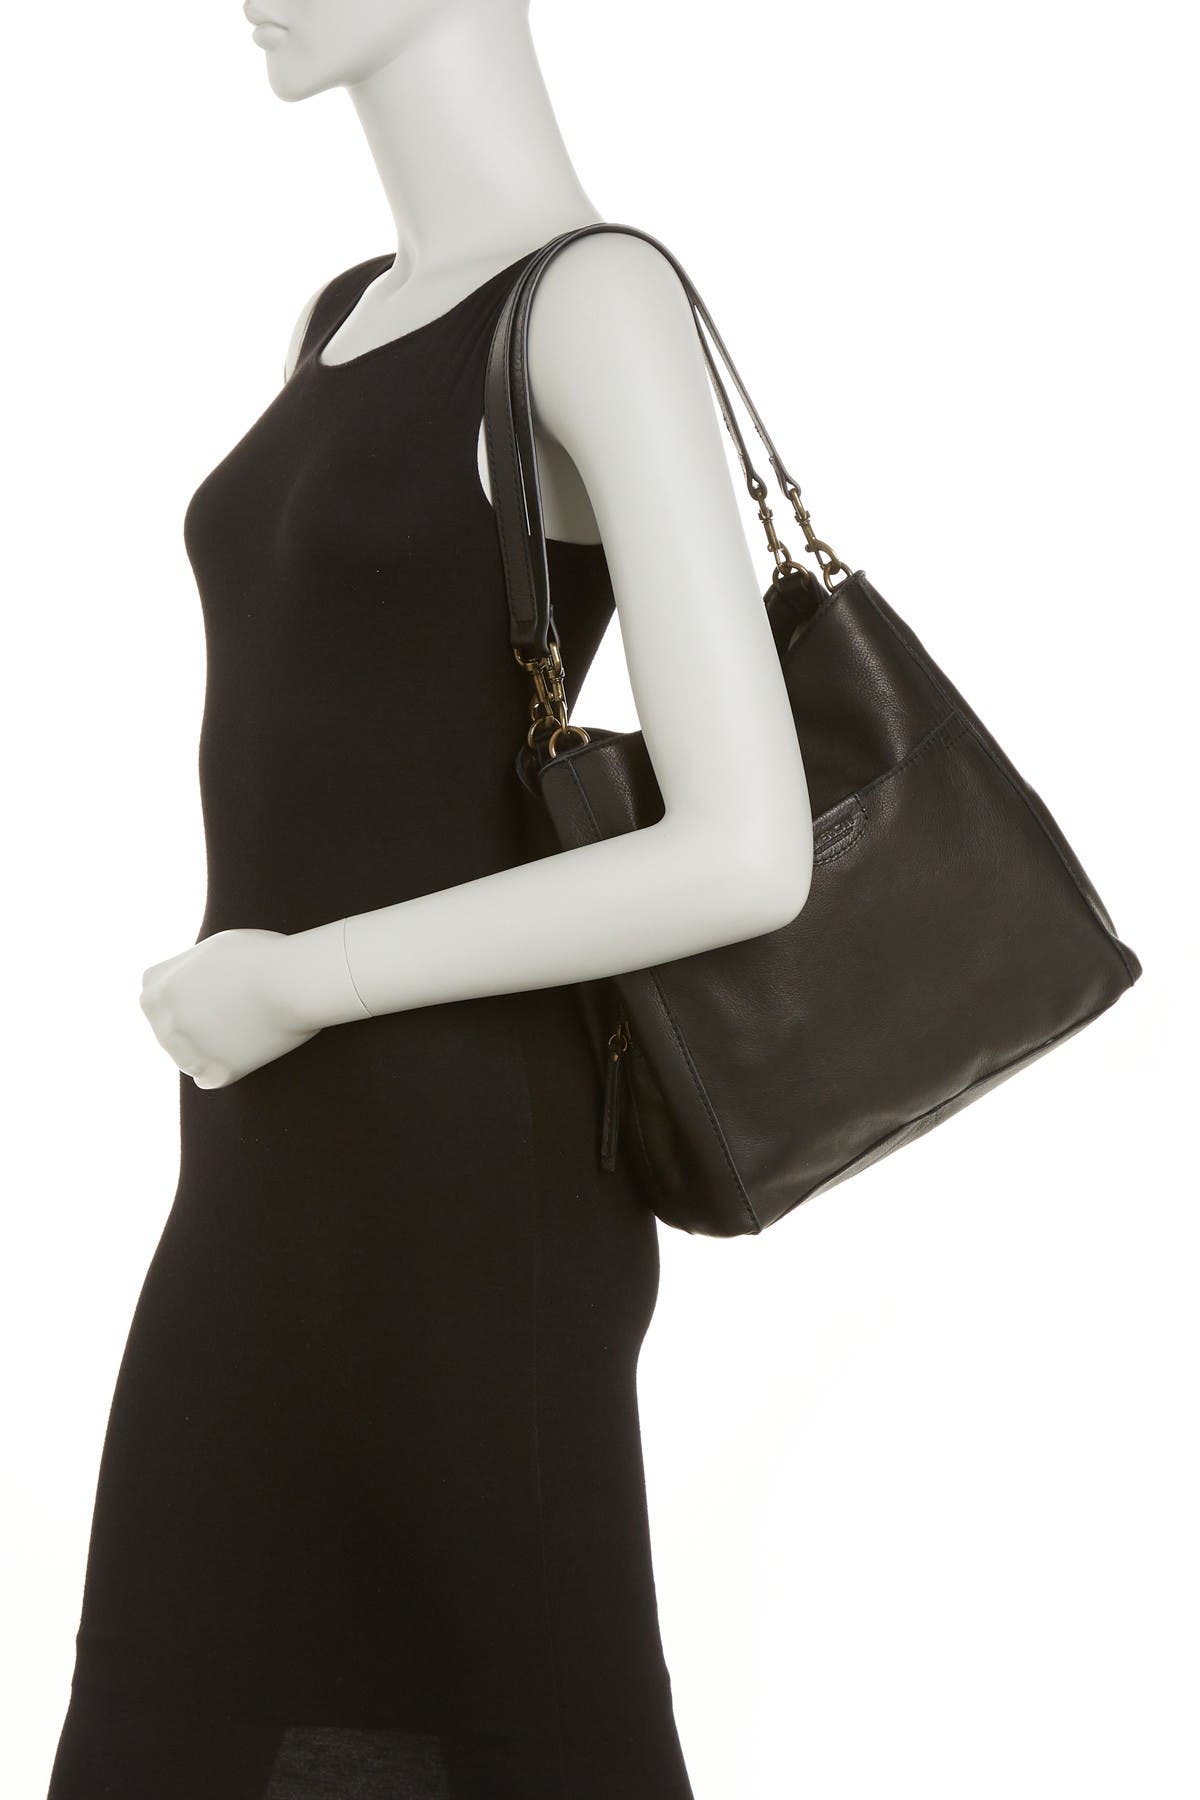 American Leather Co. Austin Leather Bucket Bag In Black Smooth